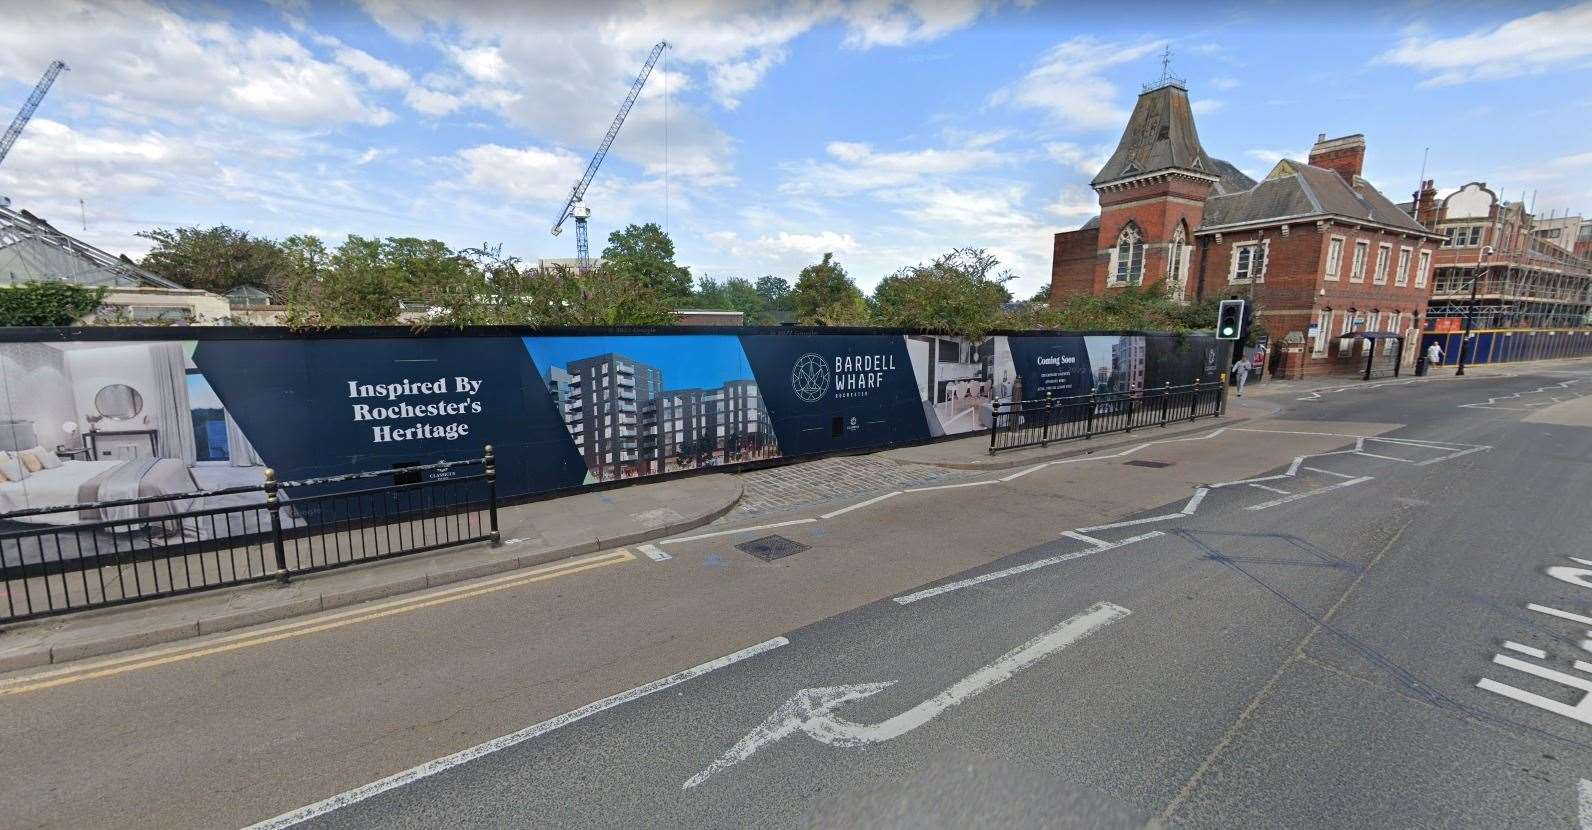 The site of the Bardell Wharf development off Rochester High Street. Picture: Google